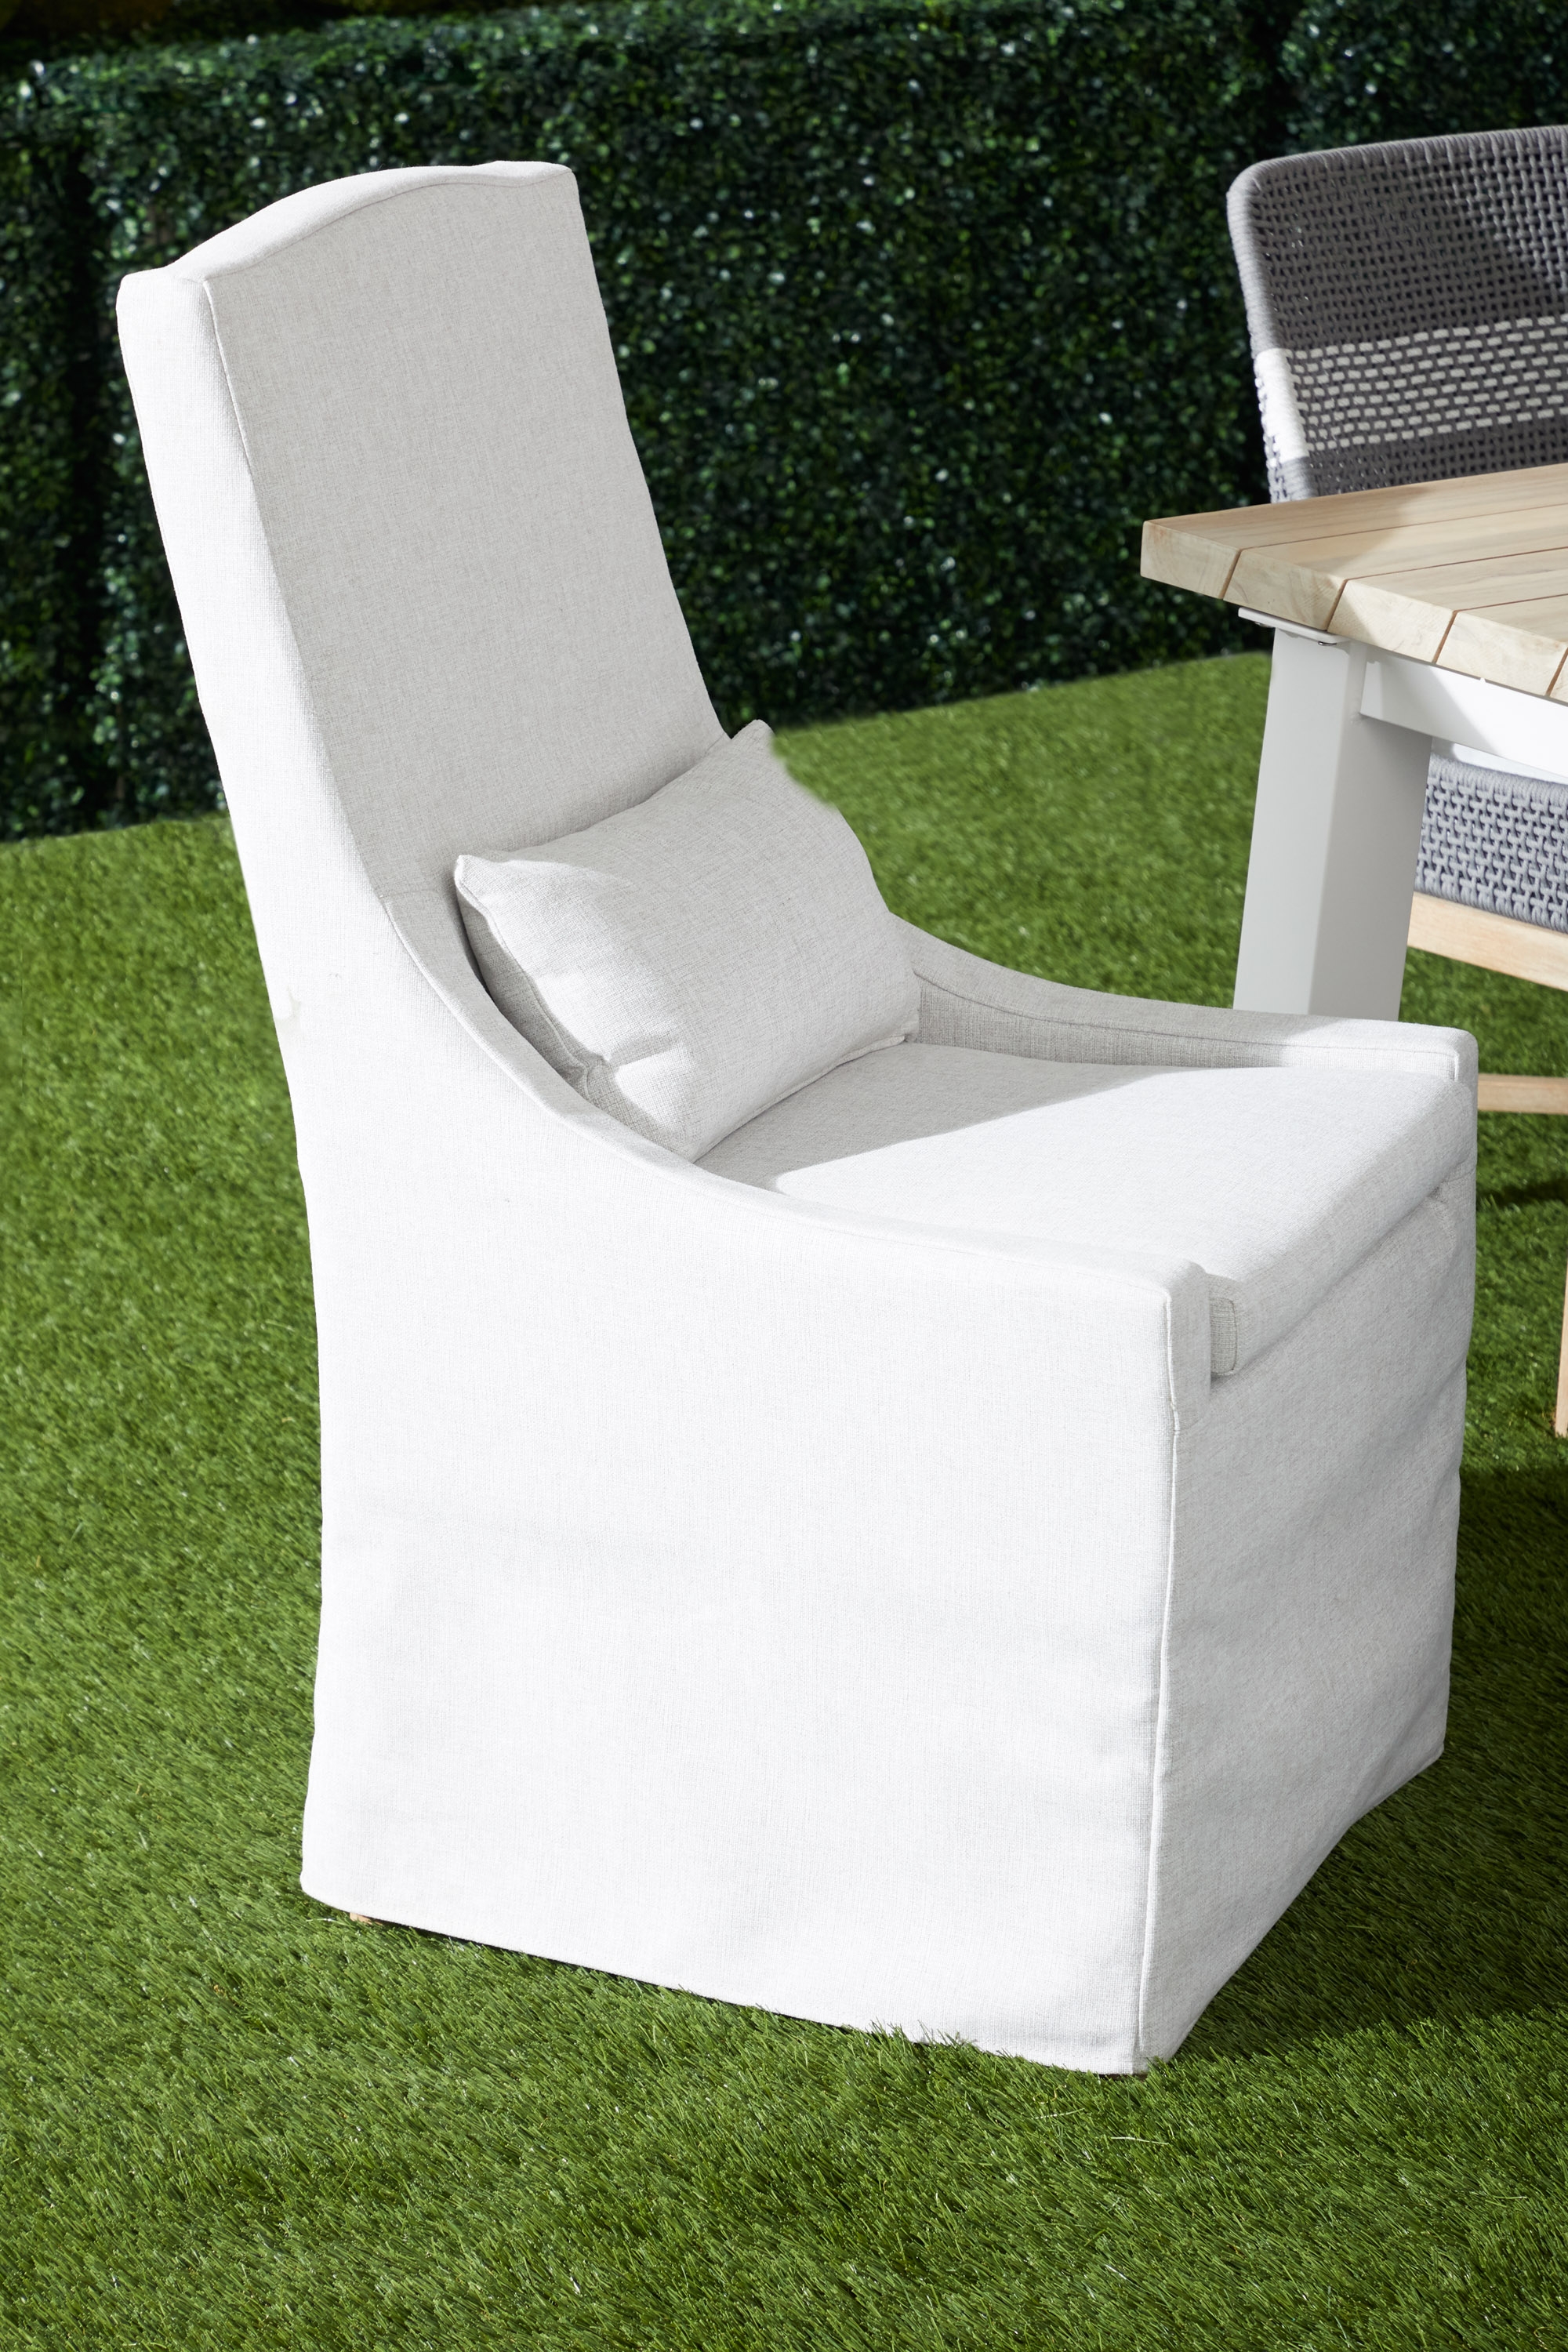 Odessa Outdoor Slipcover Dining Chair, White - Image 6